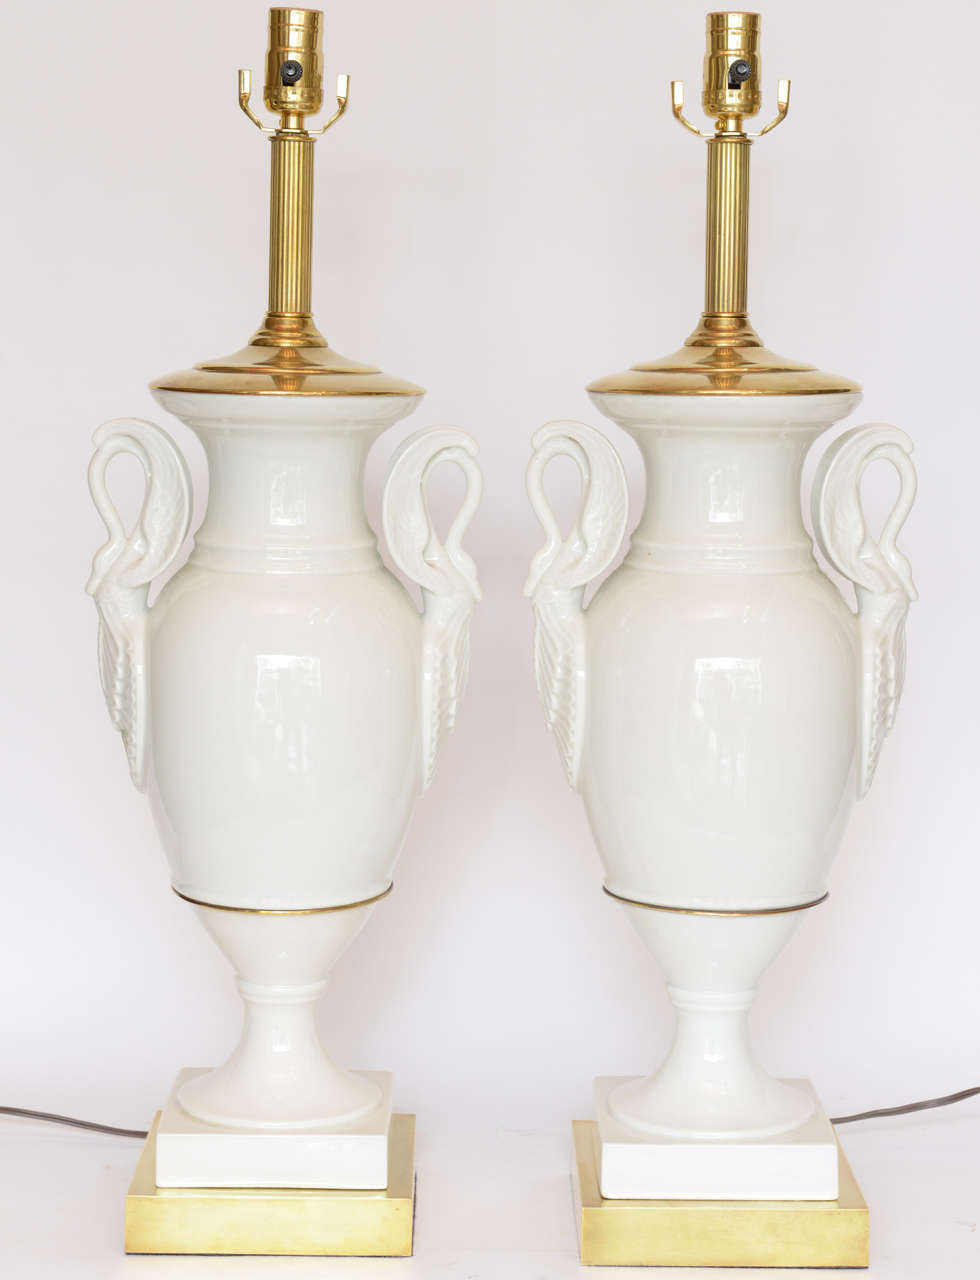 Very fine pair of swan motif white porcelain lamps with brass trim.